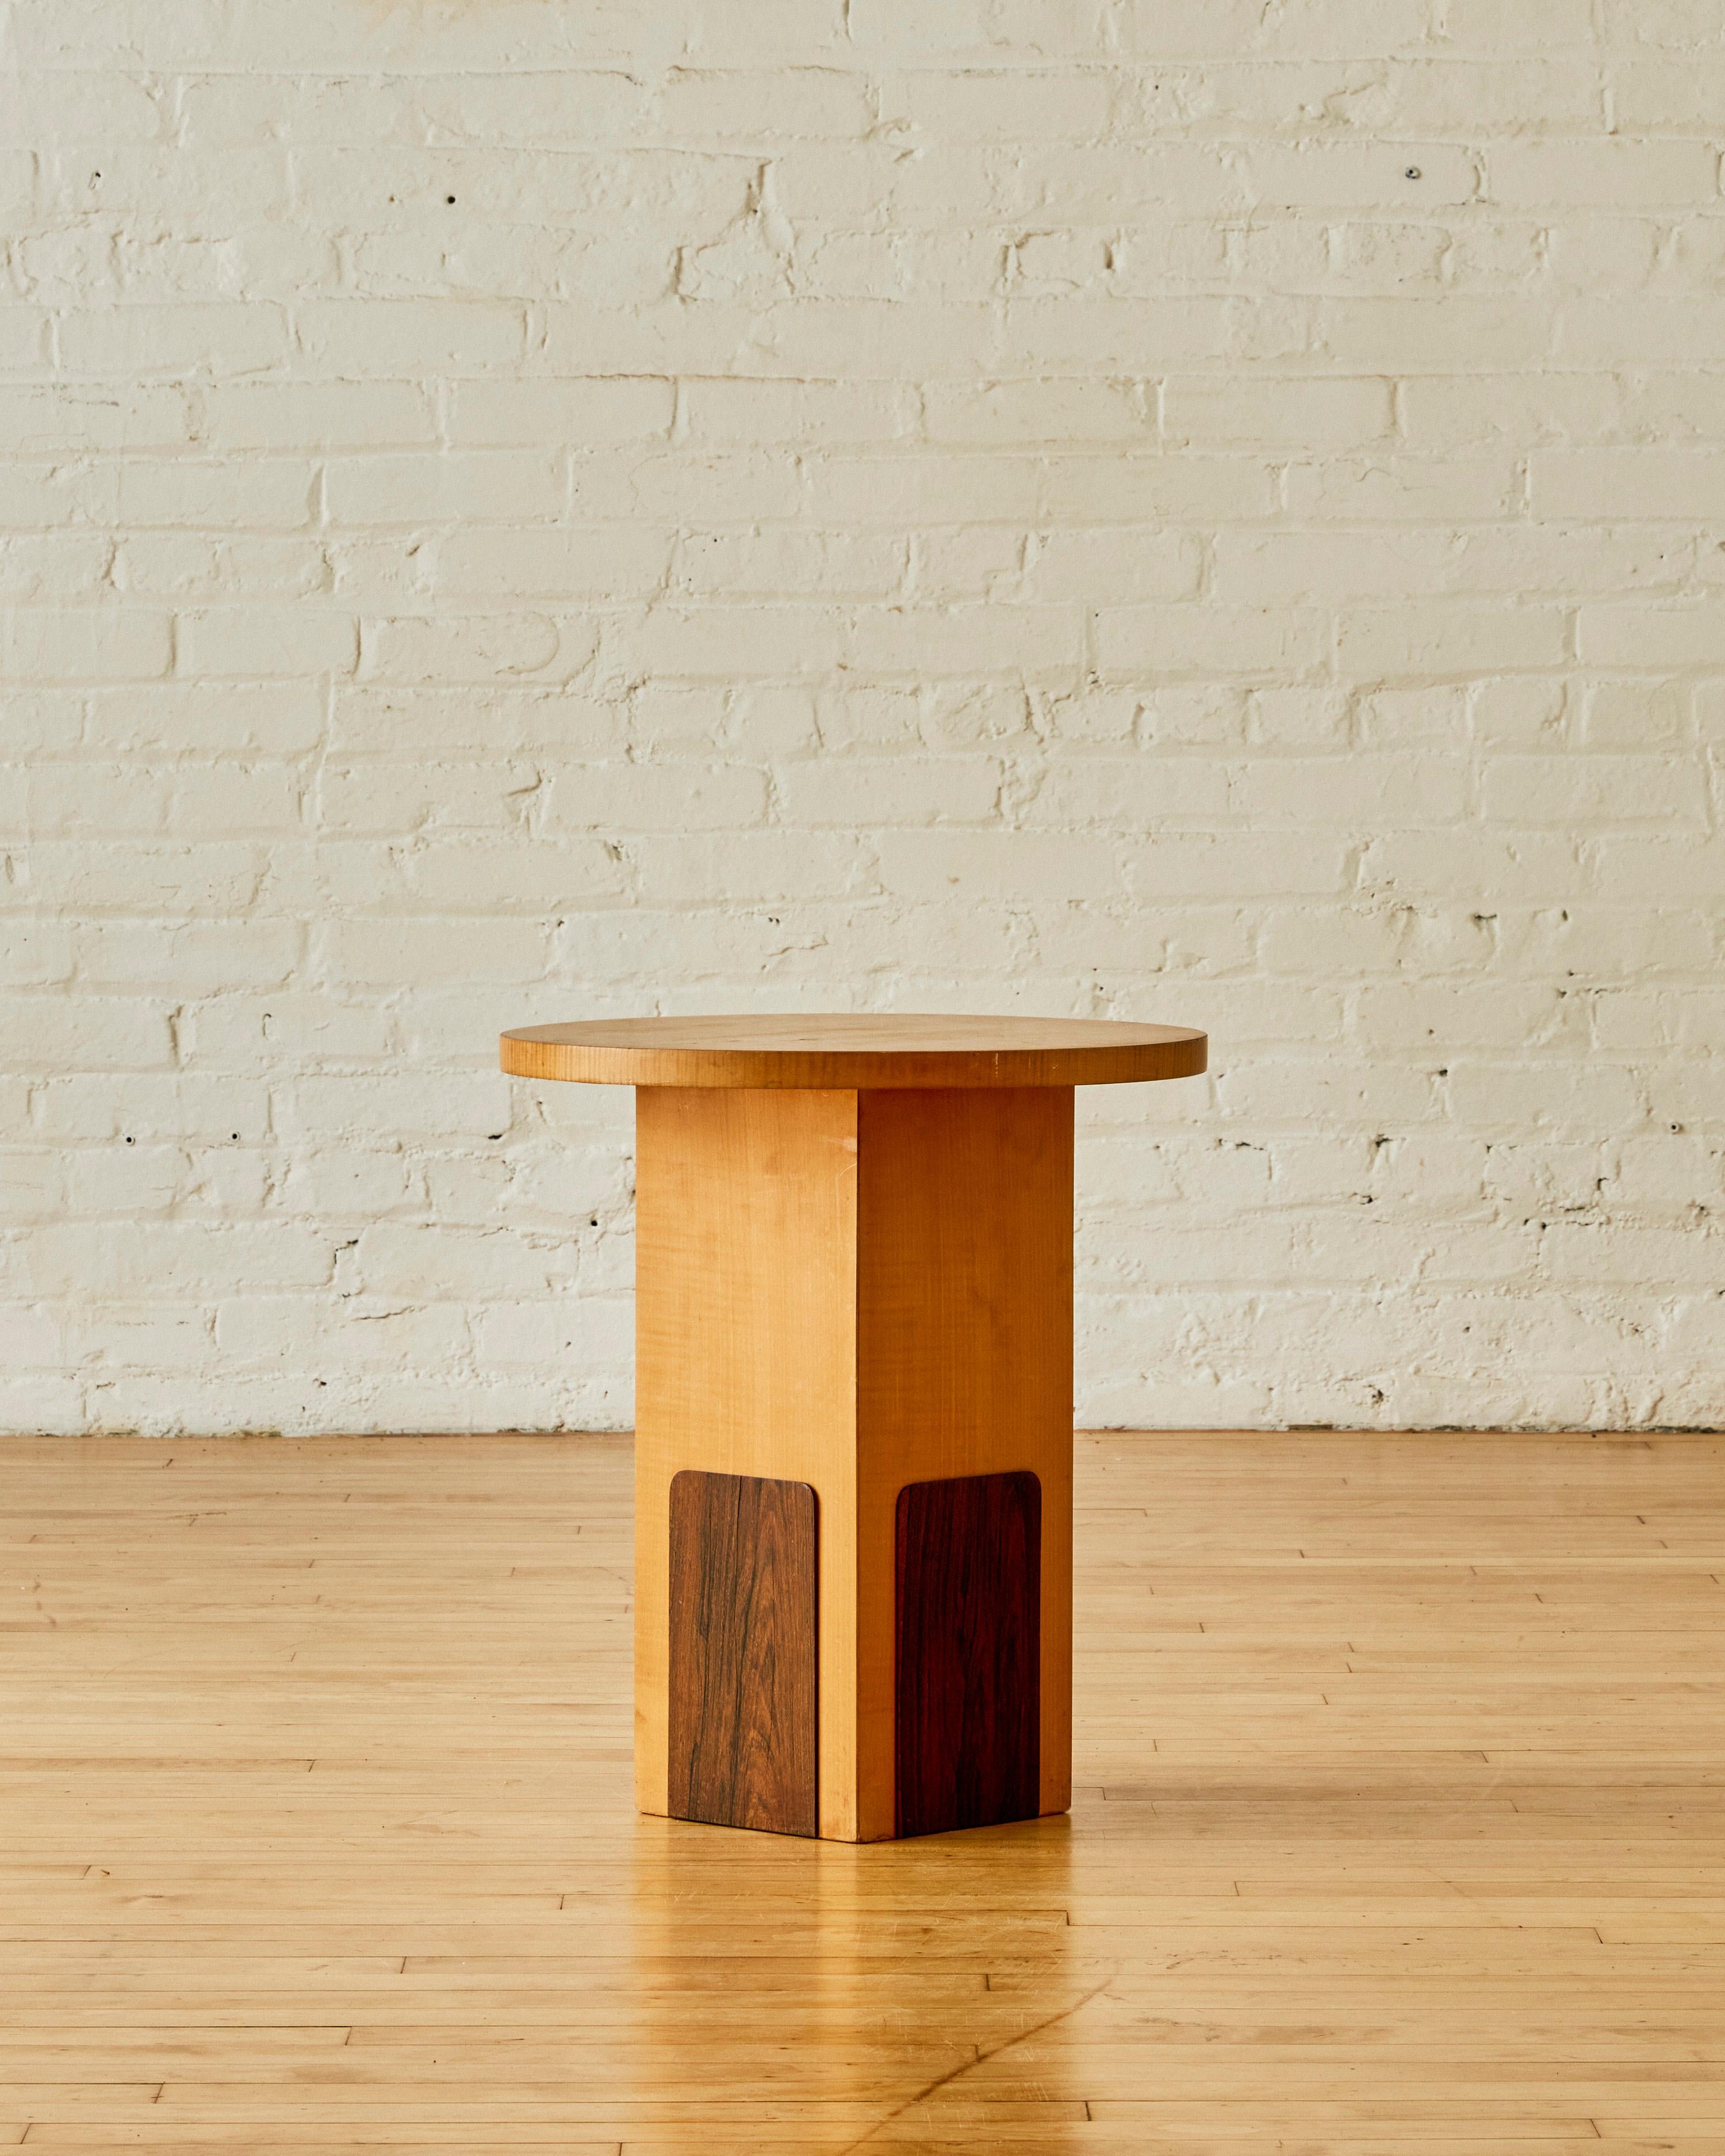 French side table by Michel Duffet featuring a round tabletop and rectangular base in sycamore wood with rosewood details.

Michel Dufet (1888-1985) was a French furniture designer who was active in the early 20th century. He was a member of the Art